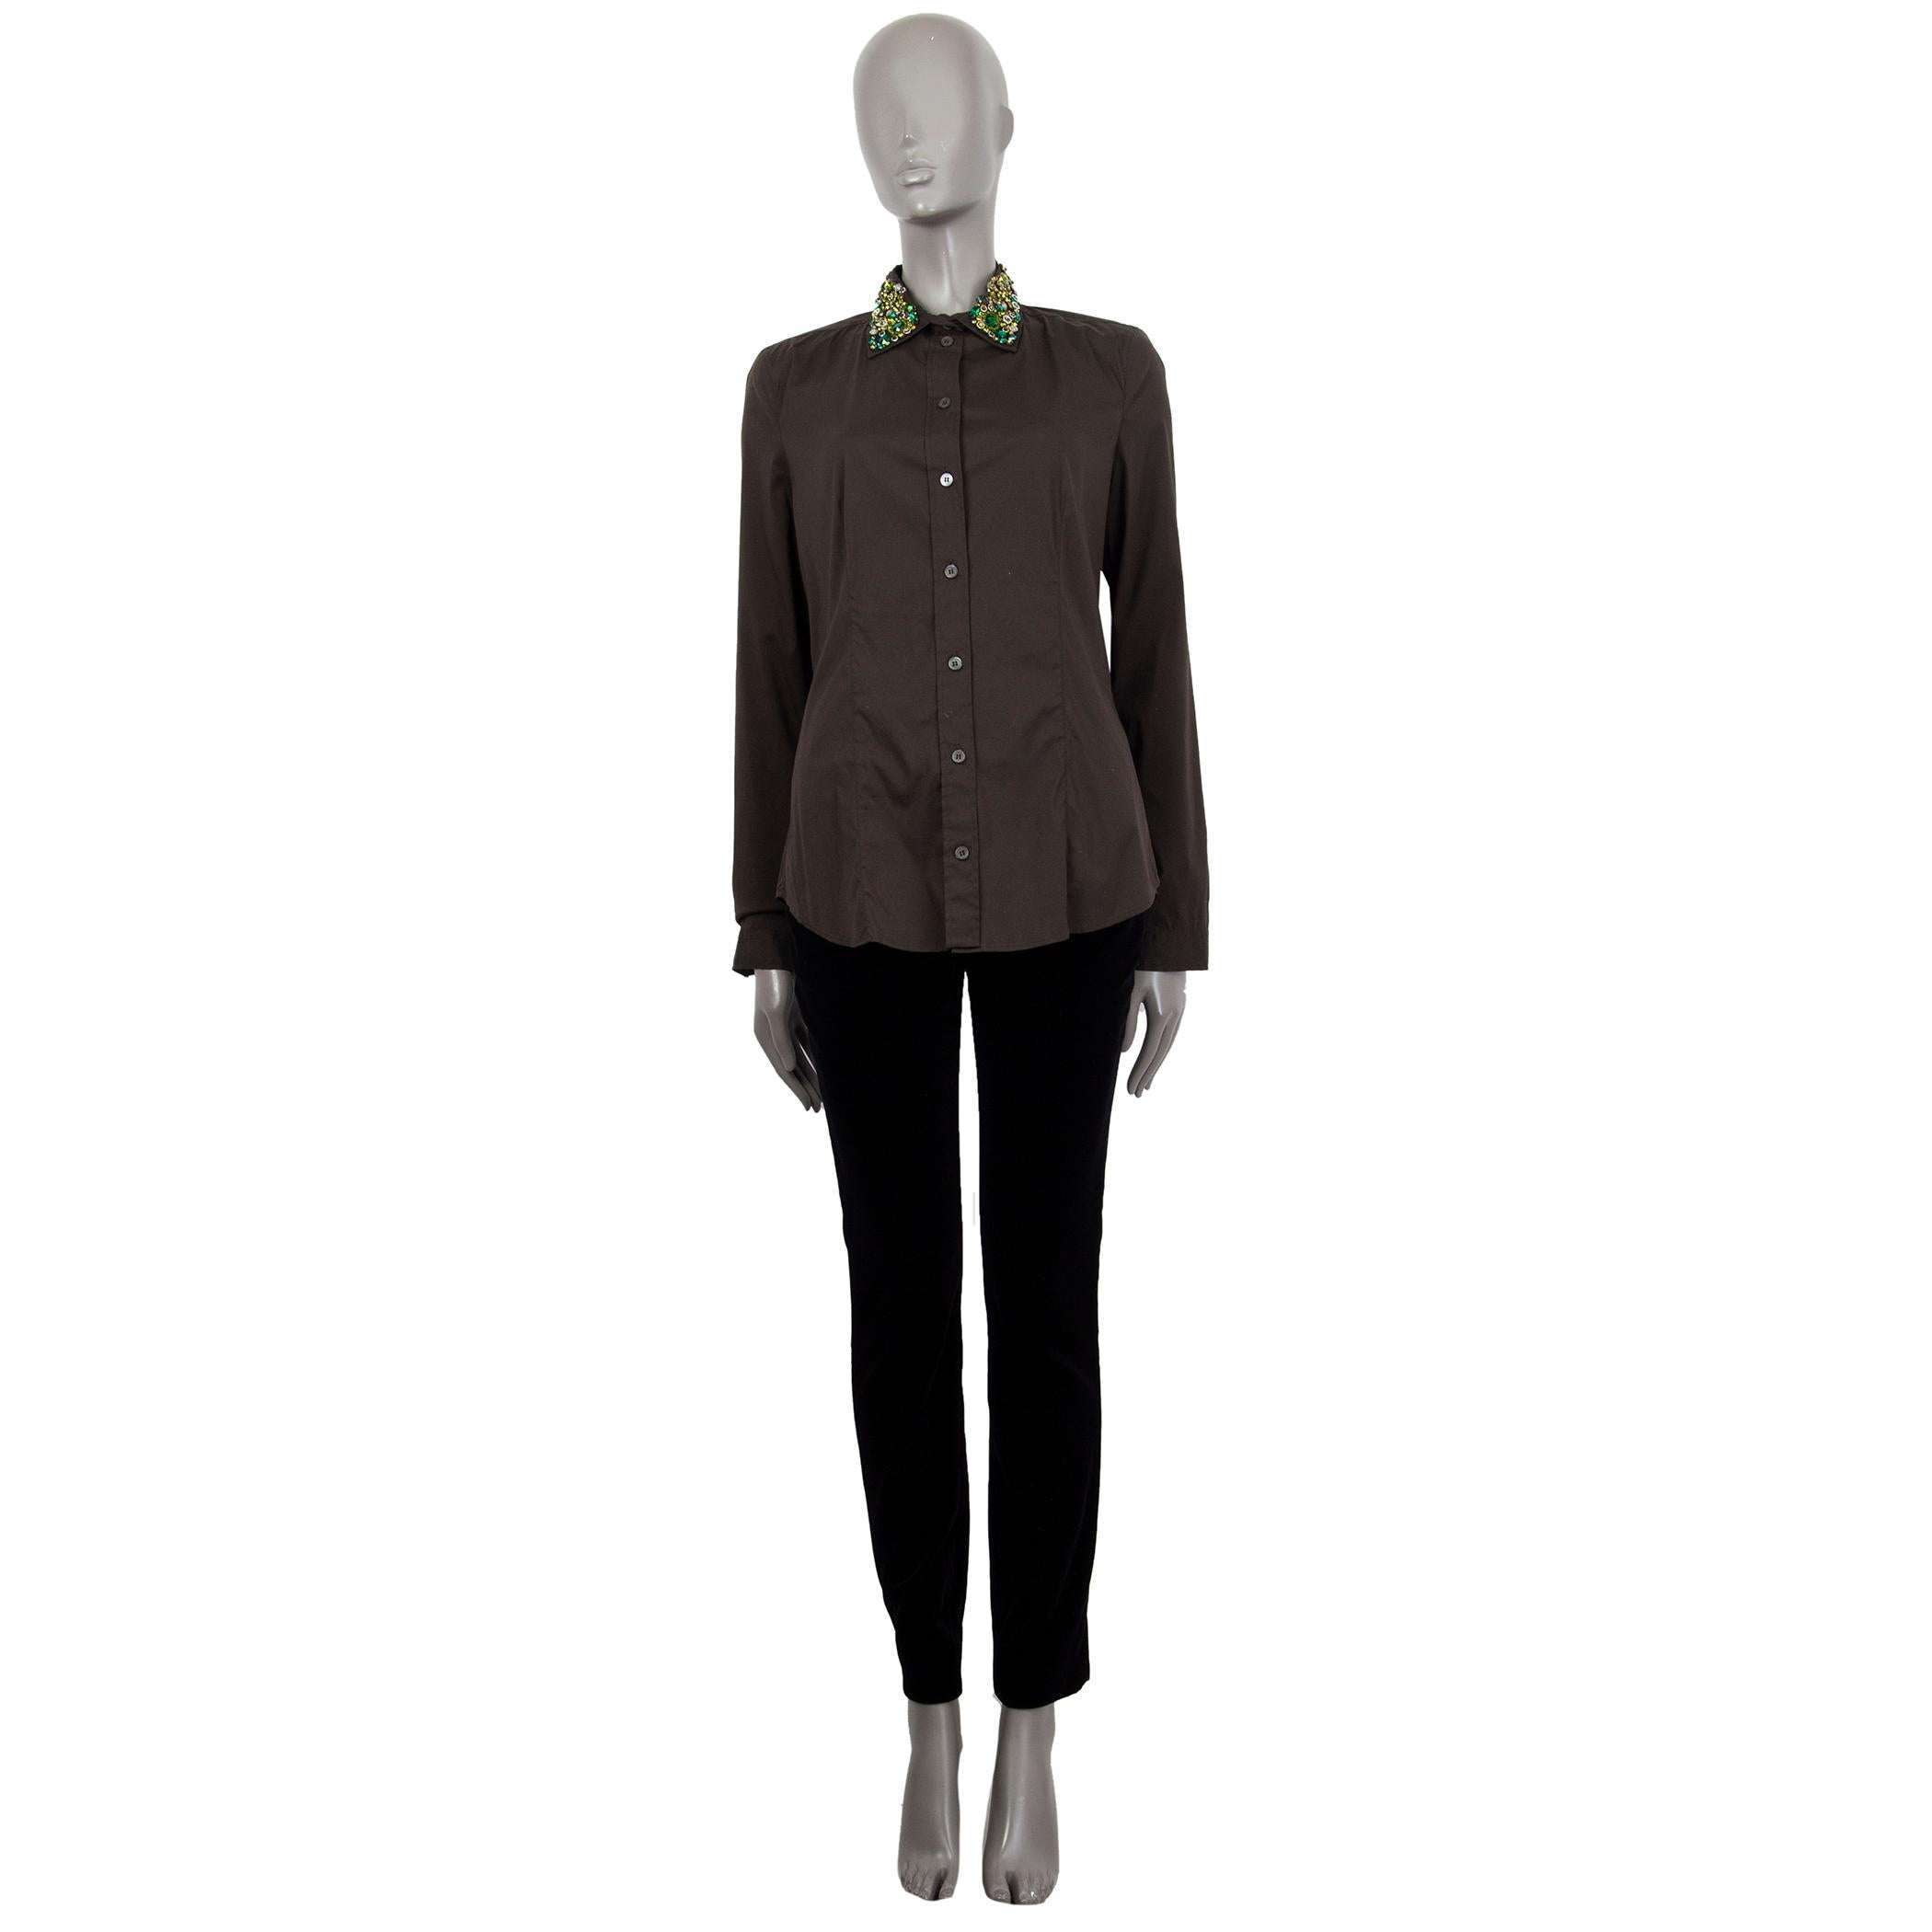 100% authentic Prada classic shirt in seaweed cotton (72%) polyamide (23%) elastane (5%) with an embellished collar rhinestones in emerald and peridote, long sleeves, button cuffs, a curved hem, close fit. Closes with button fastening in the front.